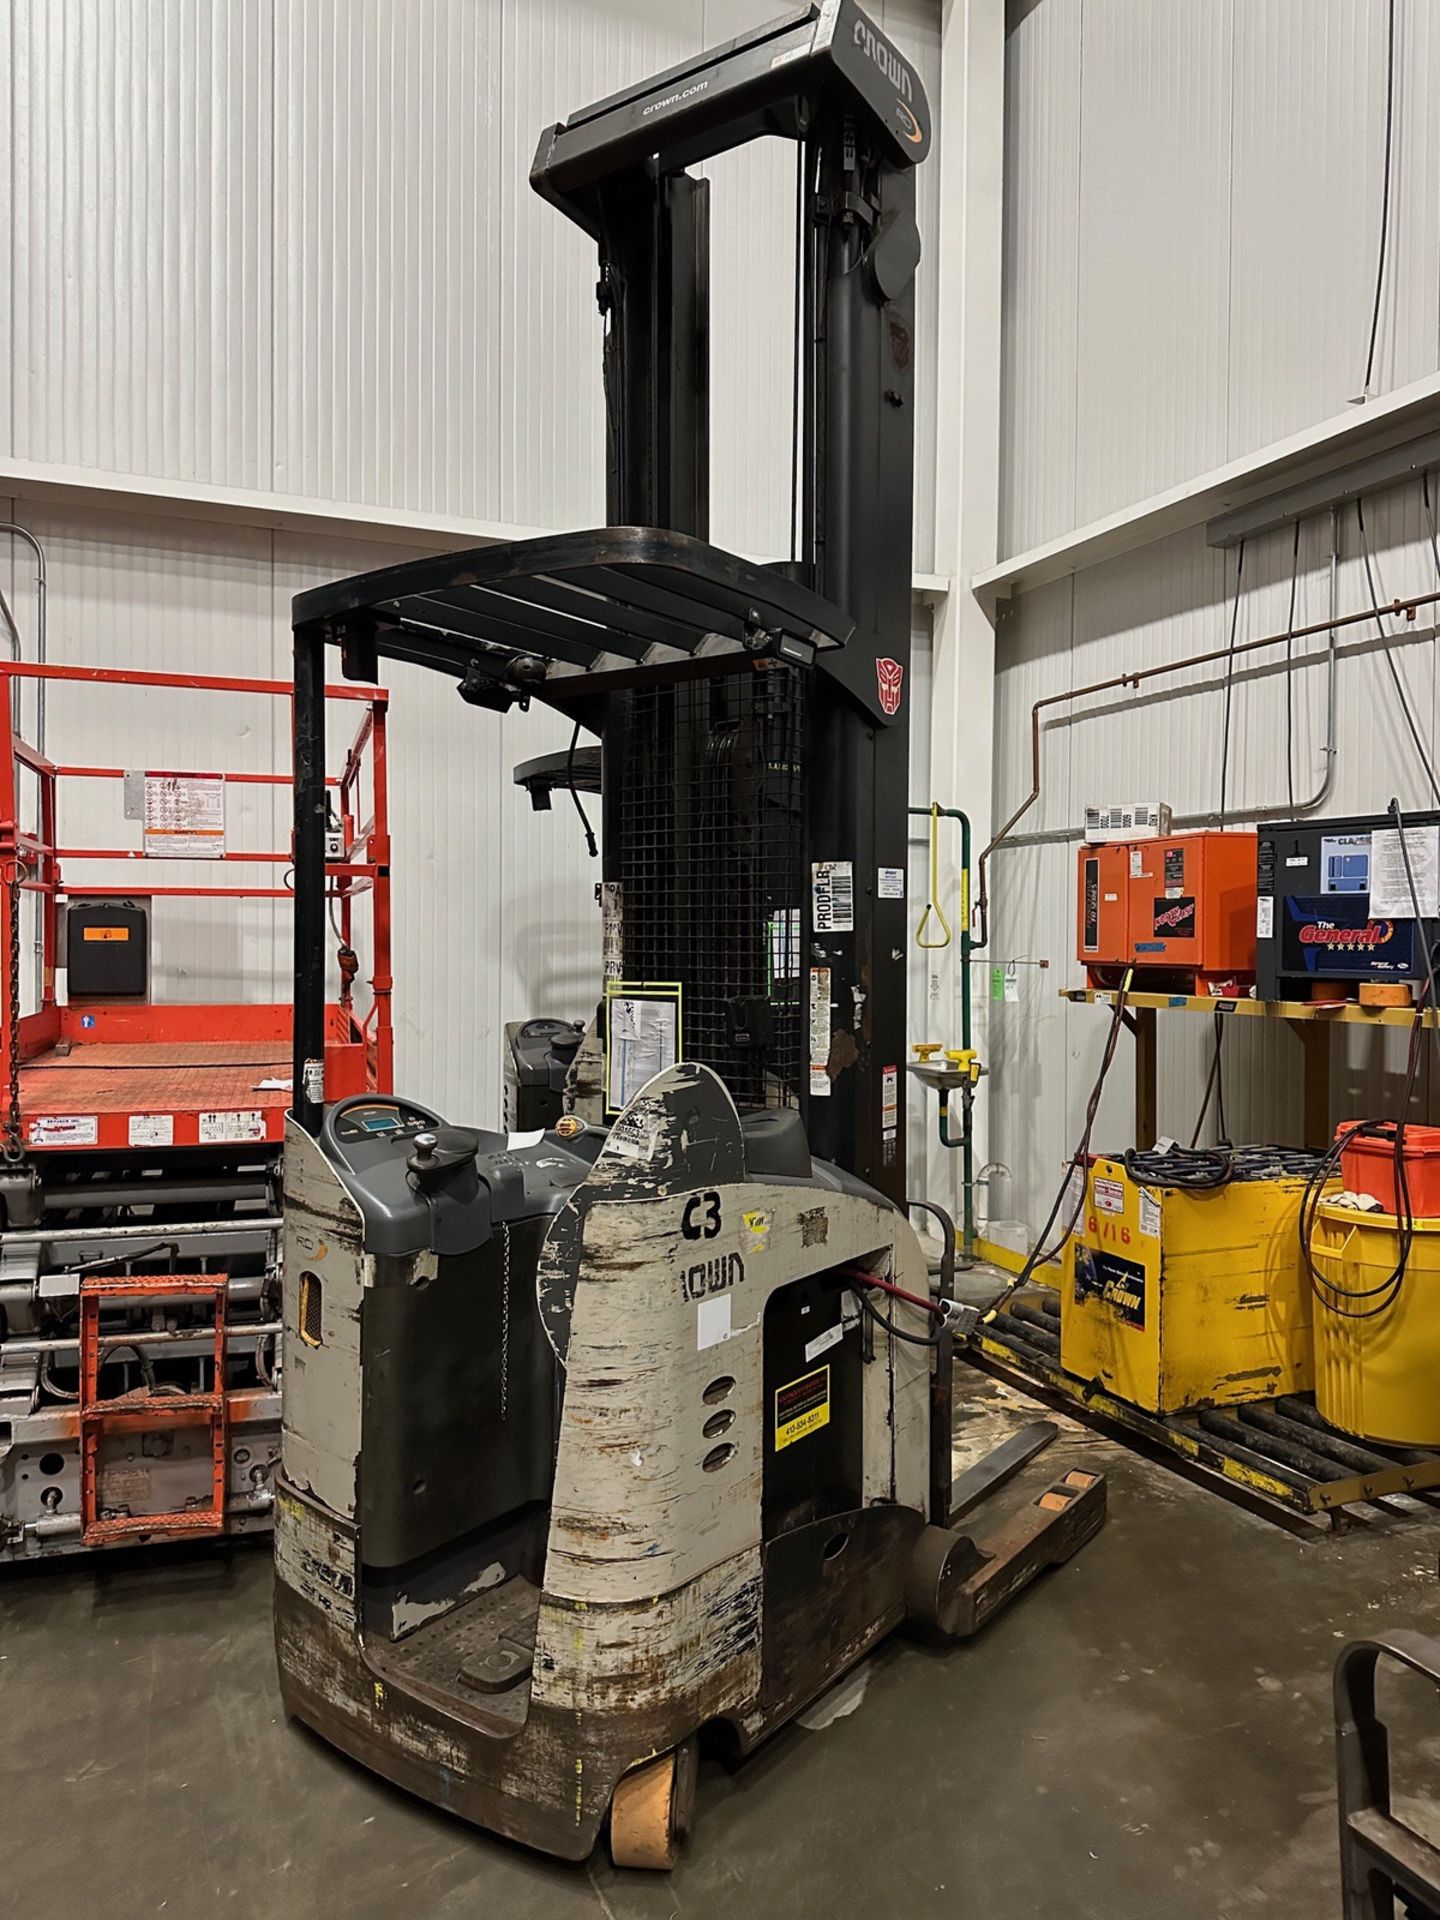 Crown High Reach Forklift, Sideshifter, S/N 1A351889 - Image 2 of 4